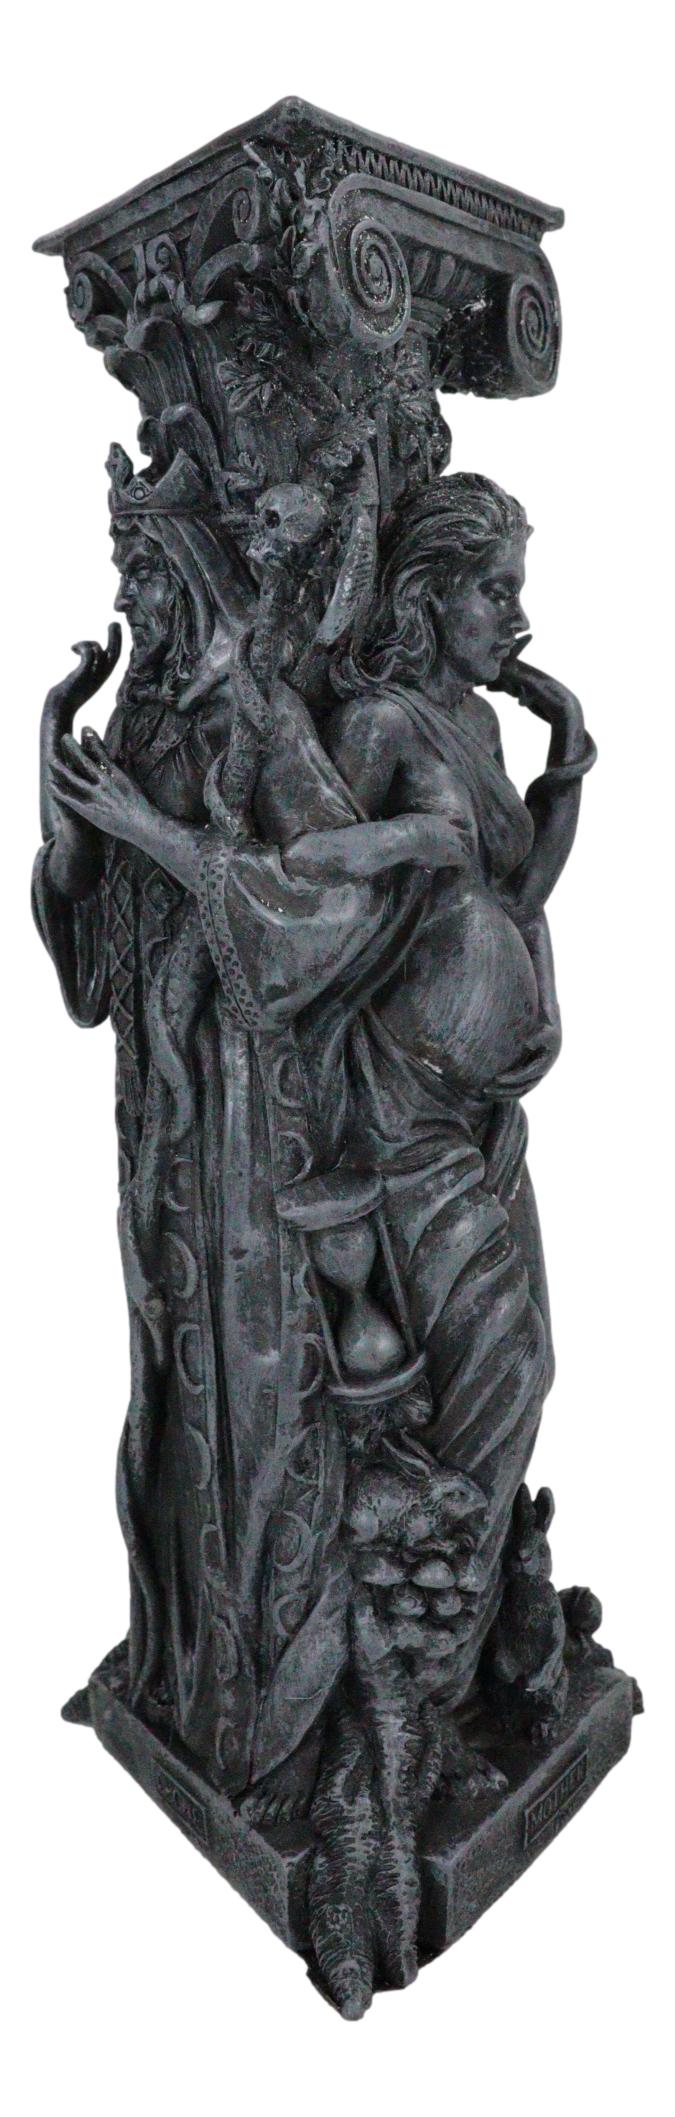 Ebros Gift Triple Goddess Maiden Expectant Mother & Crone Pagan Worship Decorative Candle Holder Figurine